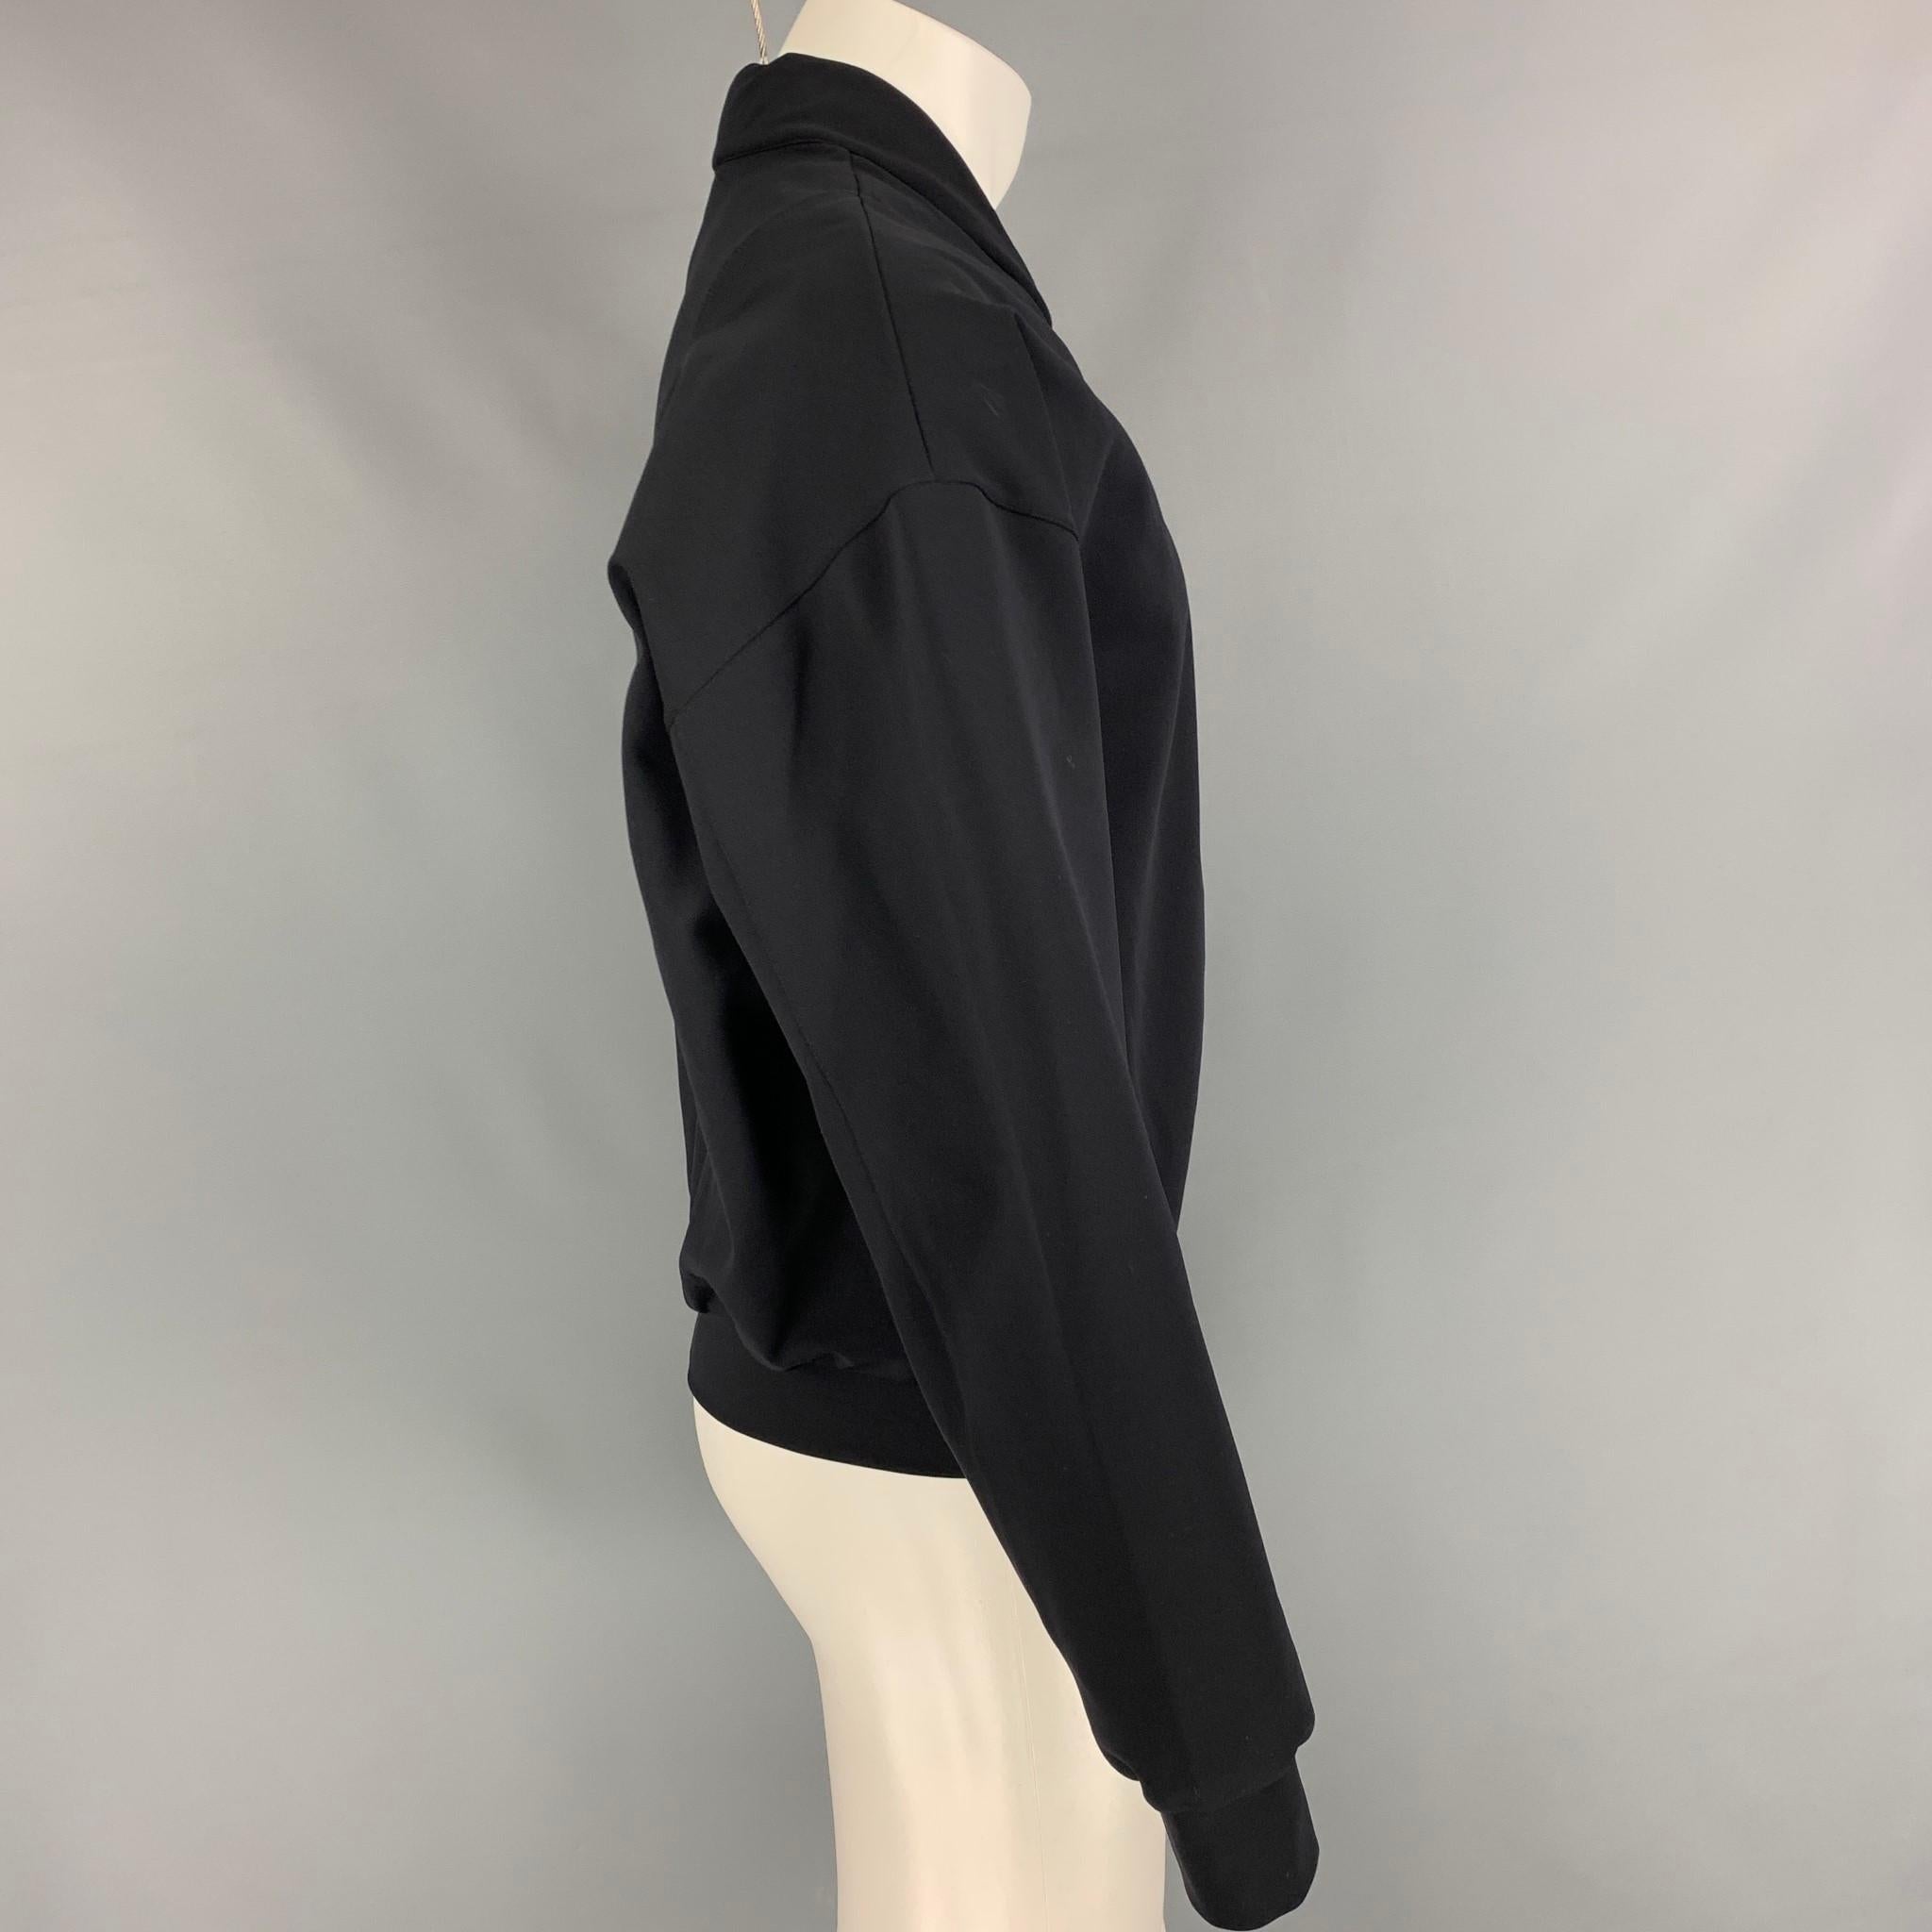 CALVIN KLEIN COLLECTION jacket comes in a black polyamide featuring a bomber style, slit pockets, loose fit, and a full zip up closure. Made in Italy. 

Excellent Pre-Owned Condition.
Marked: M

Measurements:

Shoulder: 25 in.
Chest: 50 in.
Sleeve: